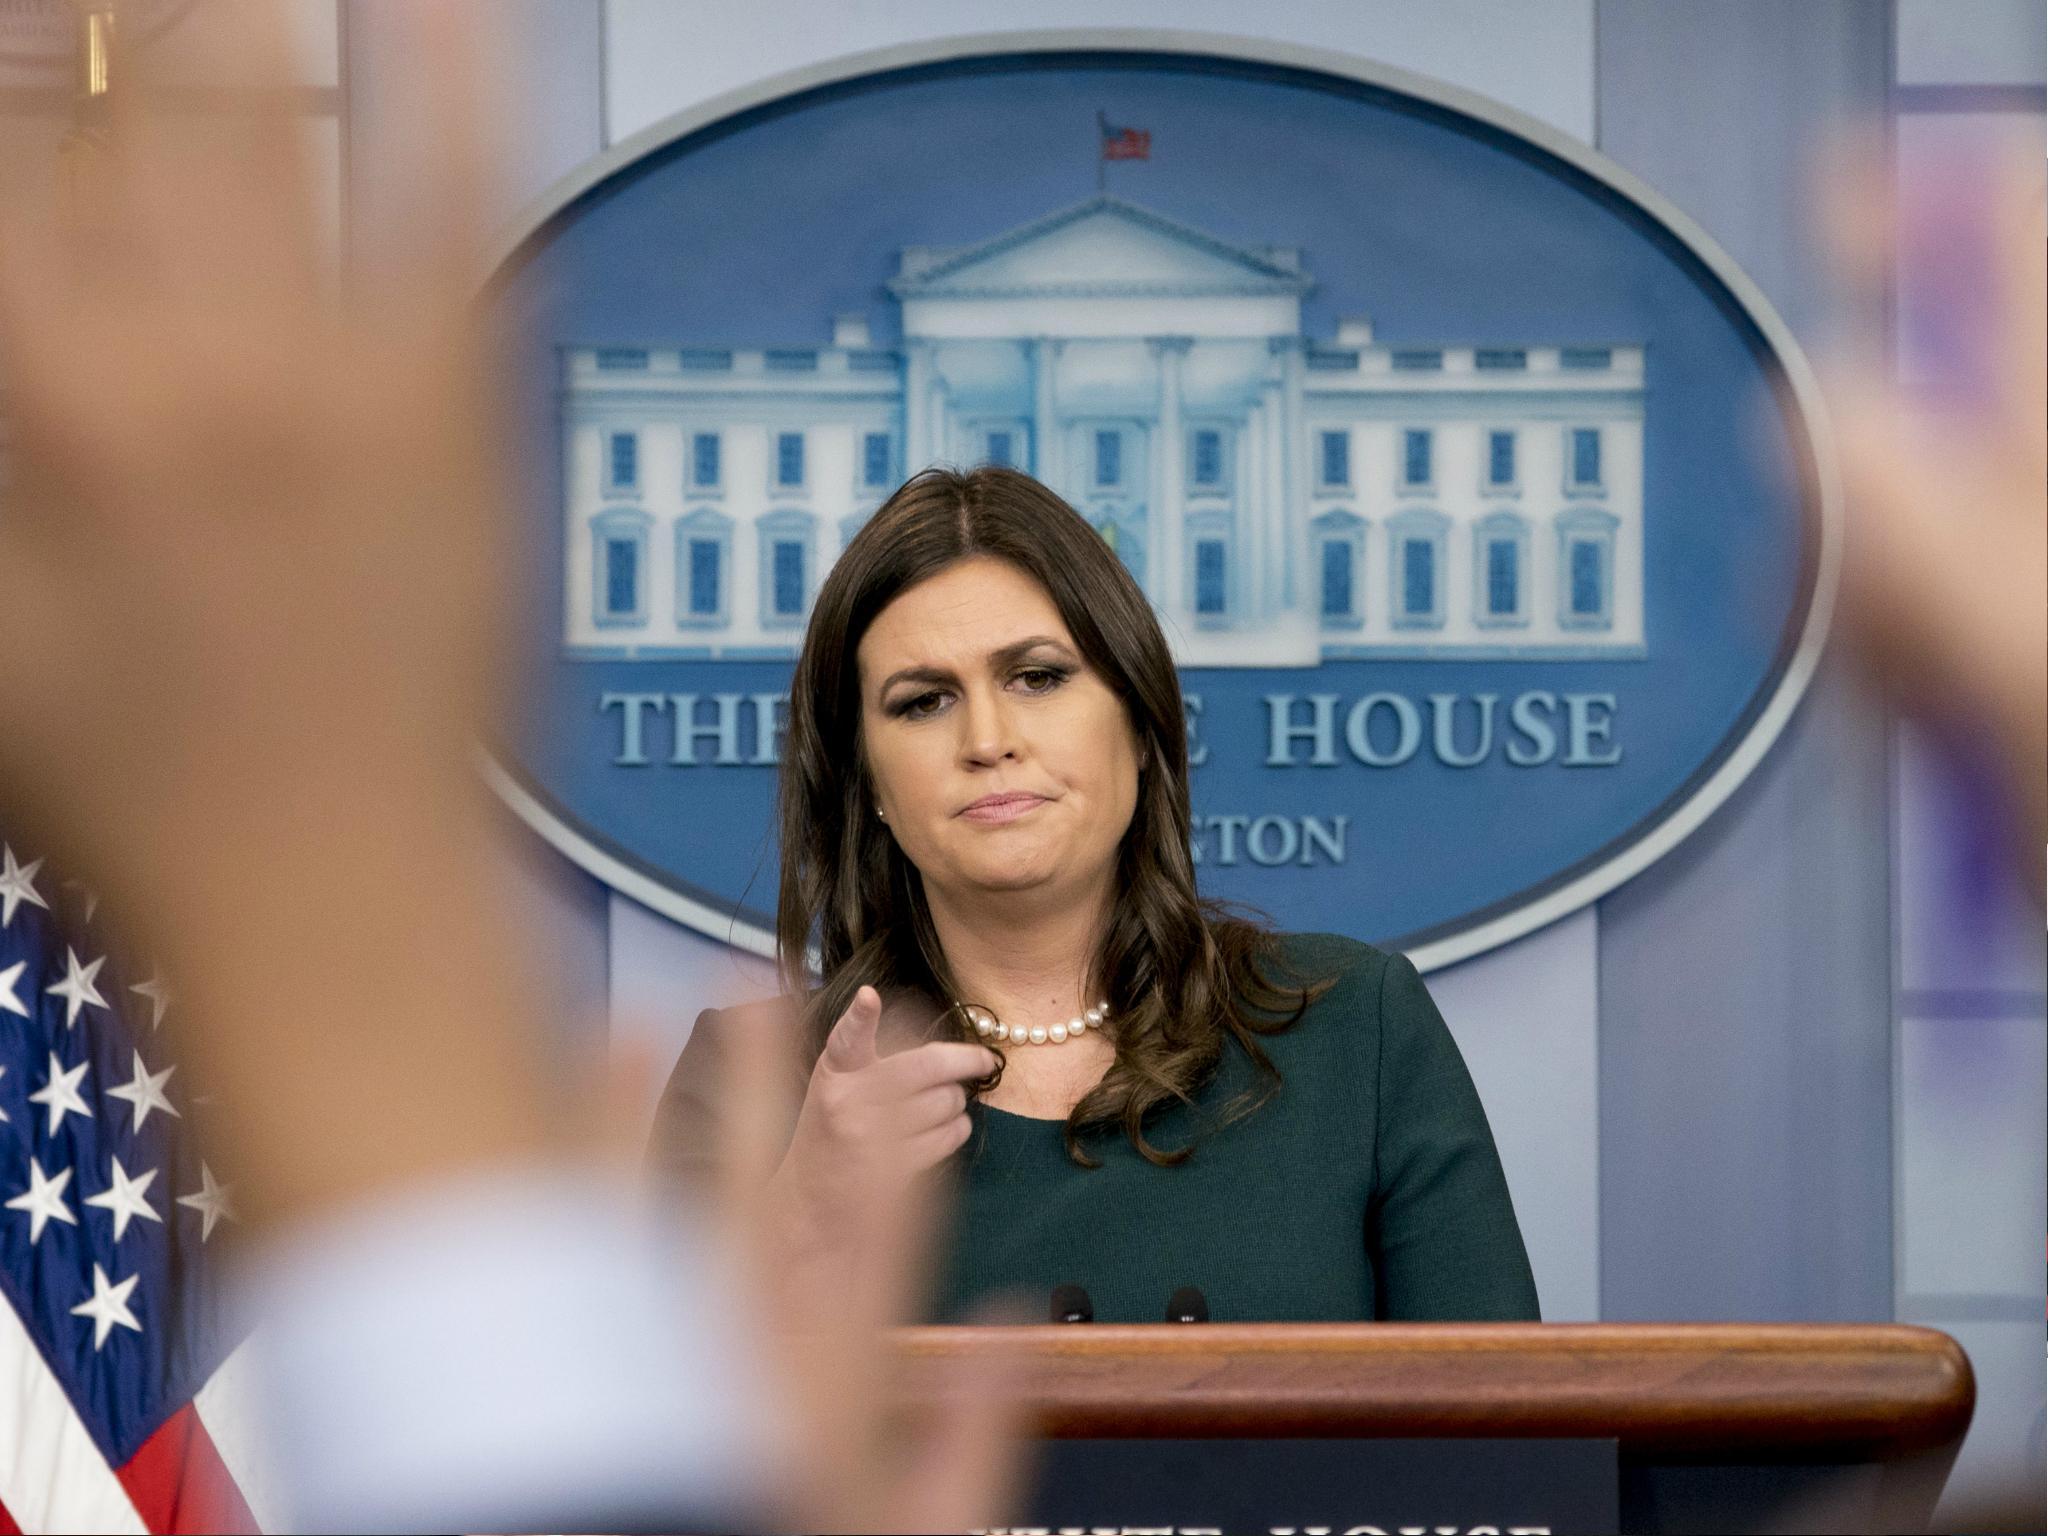 White House Press Secretary Sarah Huckabee Sanders told reporters it was 'highly inappropriate' to question a 4-star General like Chief of Staff John Kelly